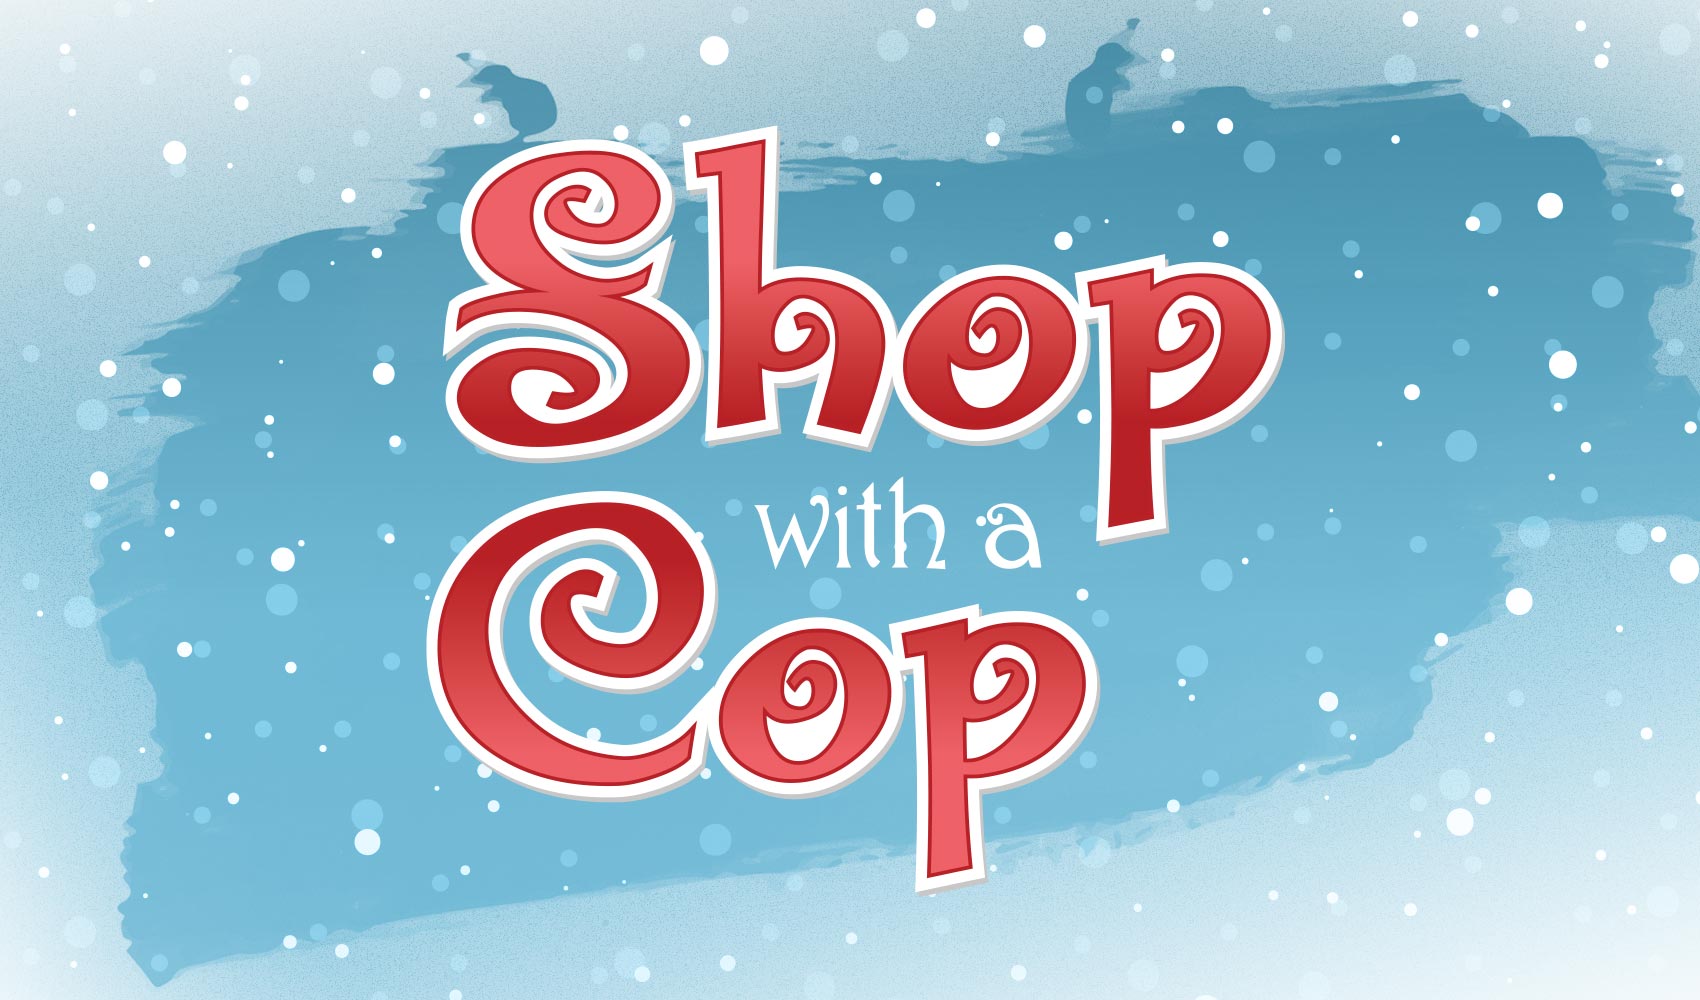 Ponca City Police Department Coffee With a Cop December 6; Donations Being Taken for the Annual “Shop With a Cop” Christmas Program